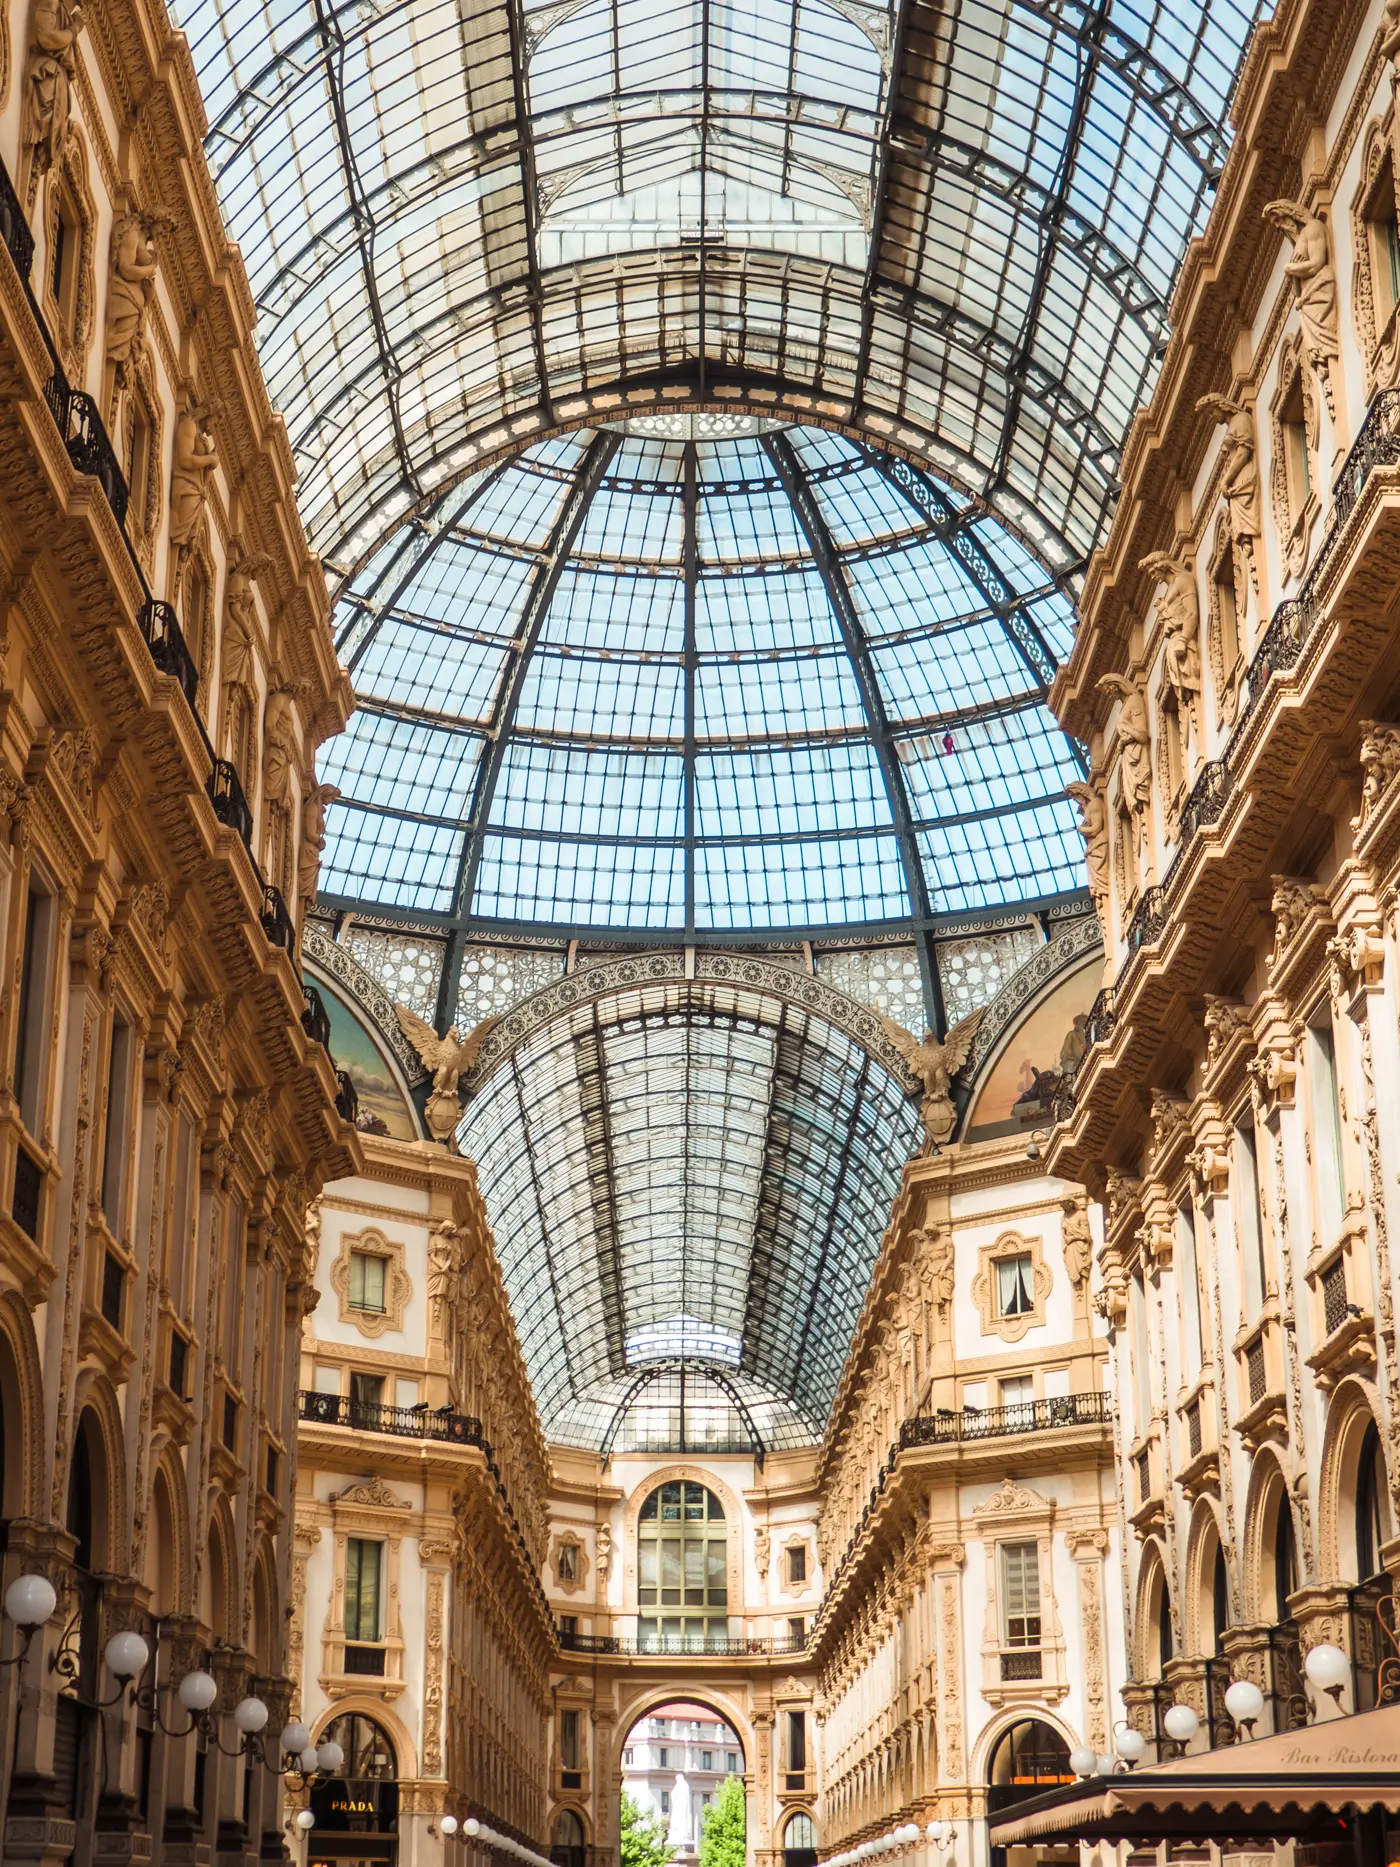 View from below of the intricate glass ceiling and beige stone walls of Galleria Vittorio Emanuele II, a must during your 2 days in Milan.